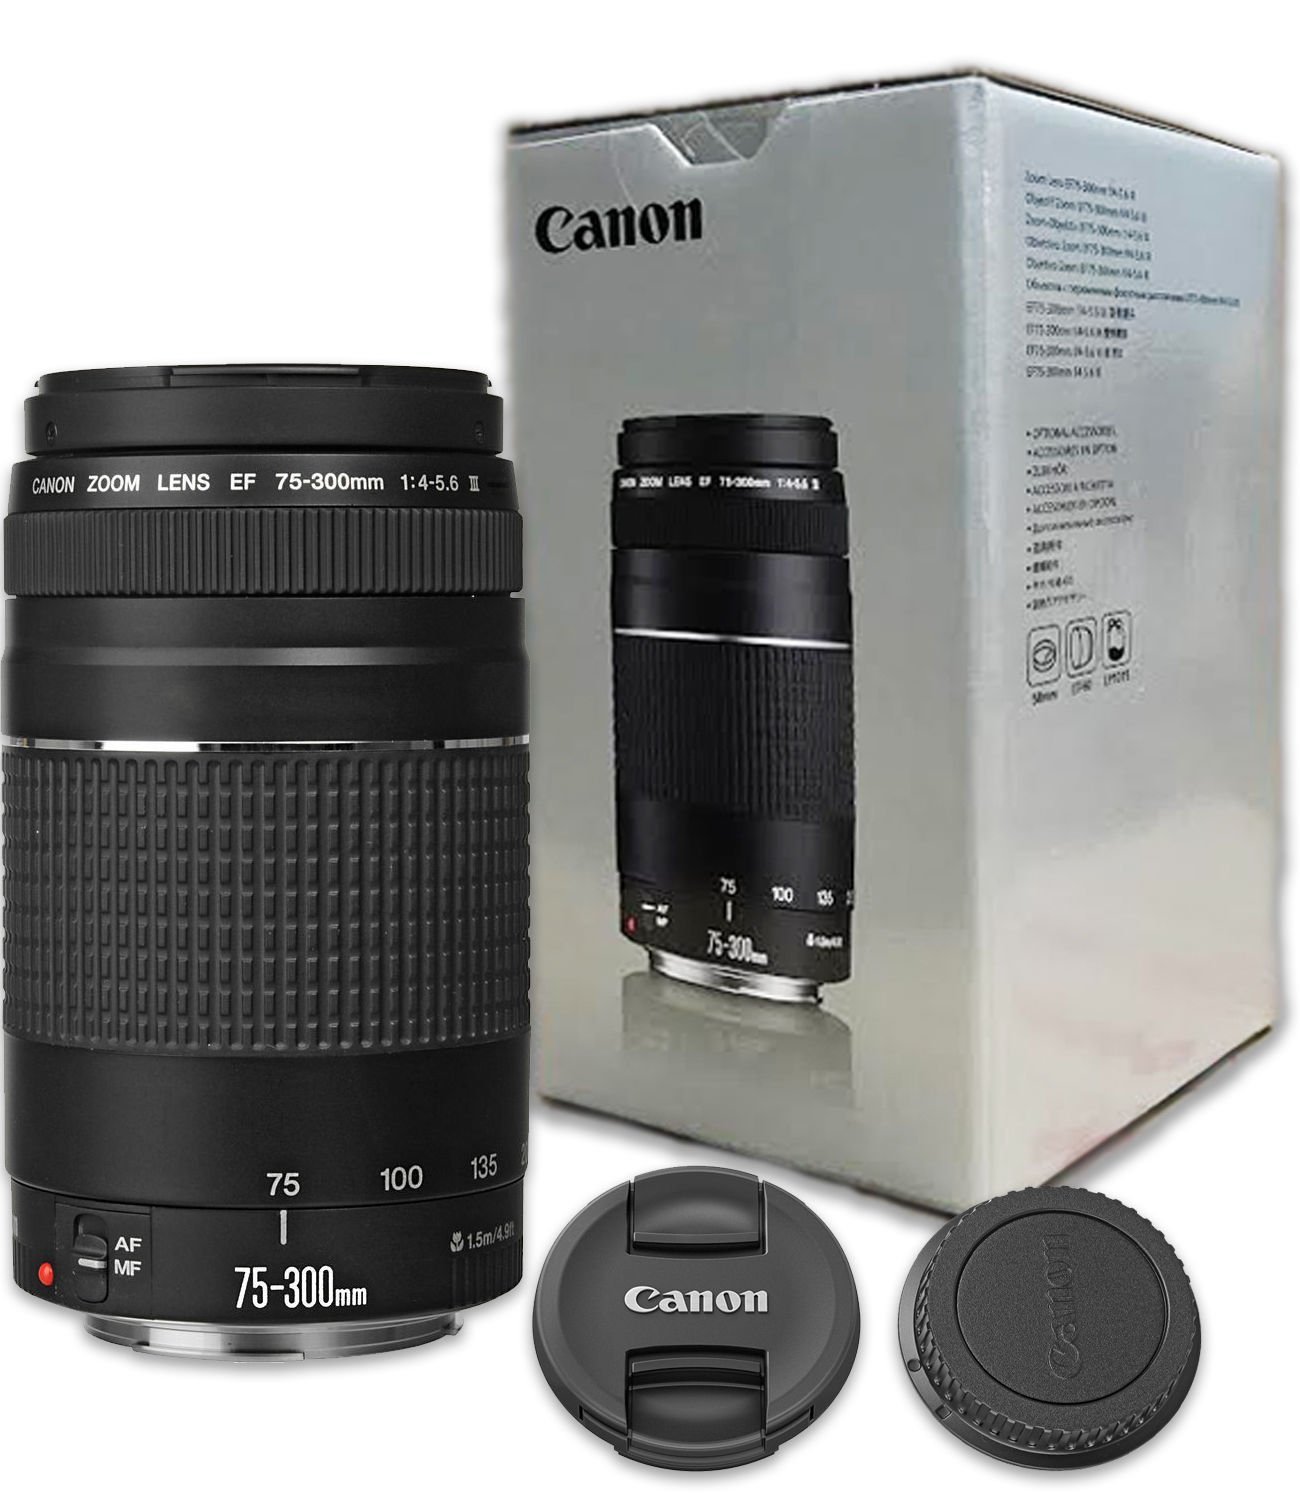 Hot Deal: Canon EF 75-300mm f/4-5.6 III for $79.90 at Amazon | Lens Rumors